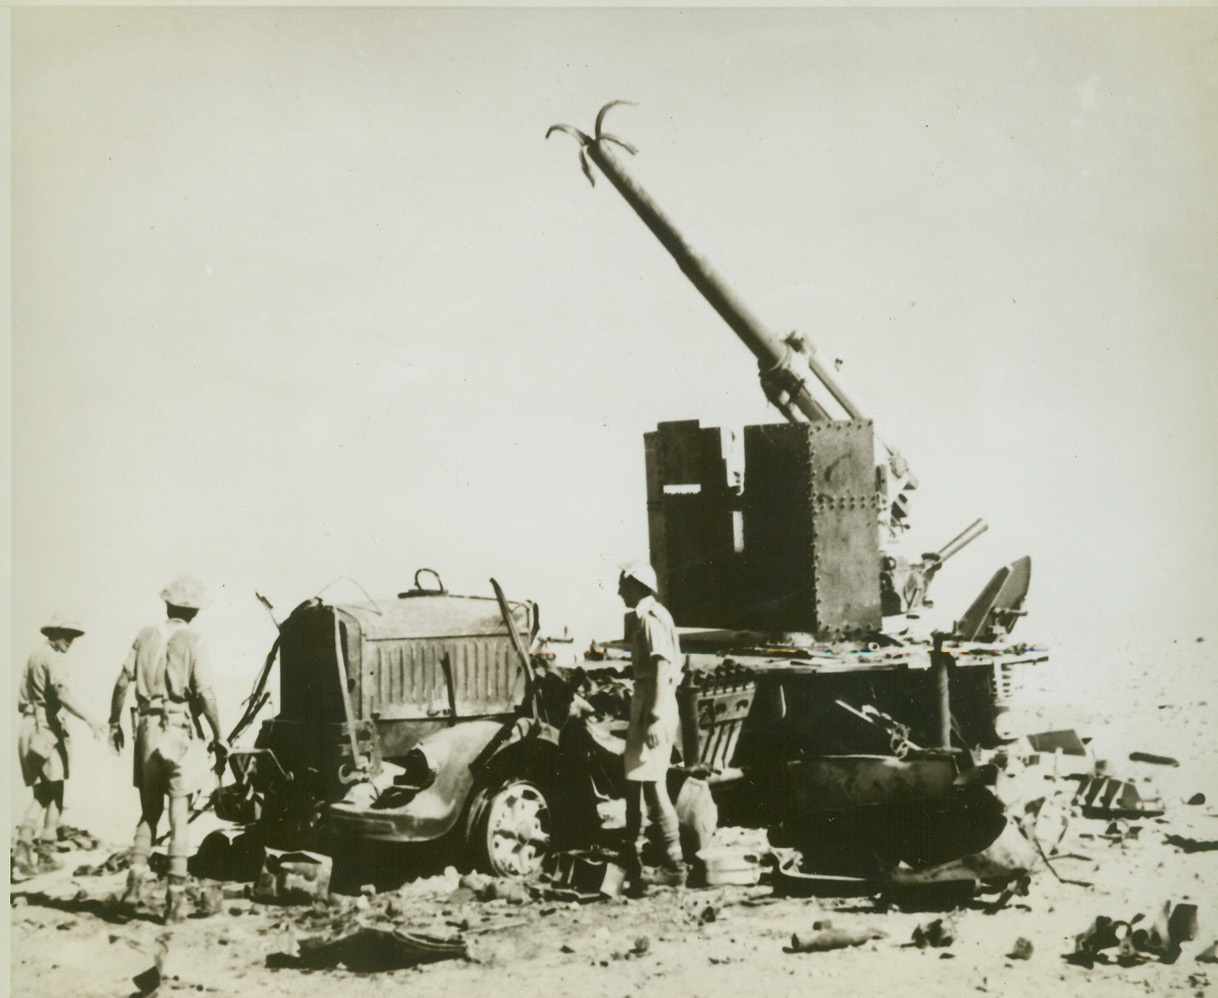 END OF AN “EIGHTY-EIGHT”, 8/7/1942. EGYPT – No more shots will be fired from this 88-mm. German anti-tank which was wrecked by high explosive shells fired by New Zealand 25-pound field guns. Rommel’s men blew up the muzzle before abandoning the gun. (Photo released by New Zealand Legation) Credit: ACME;